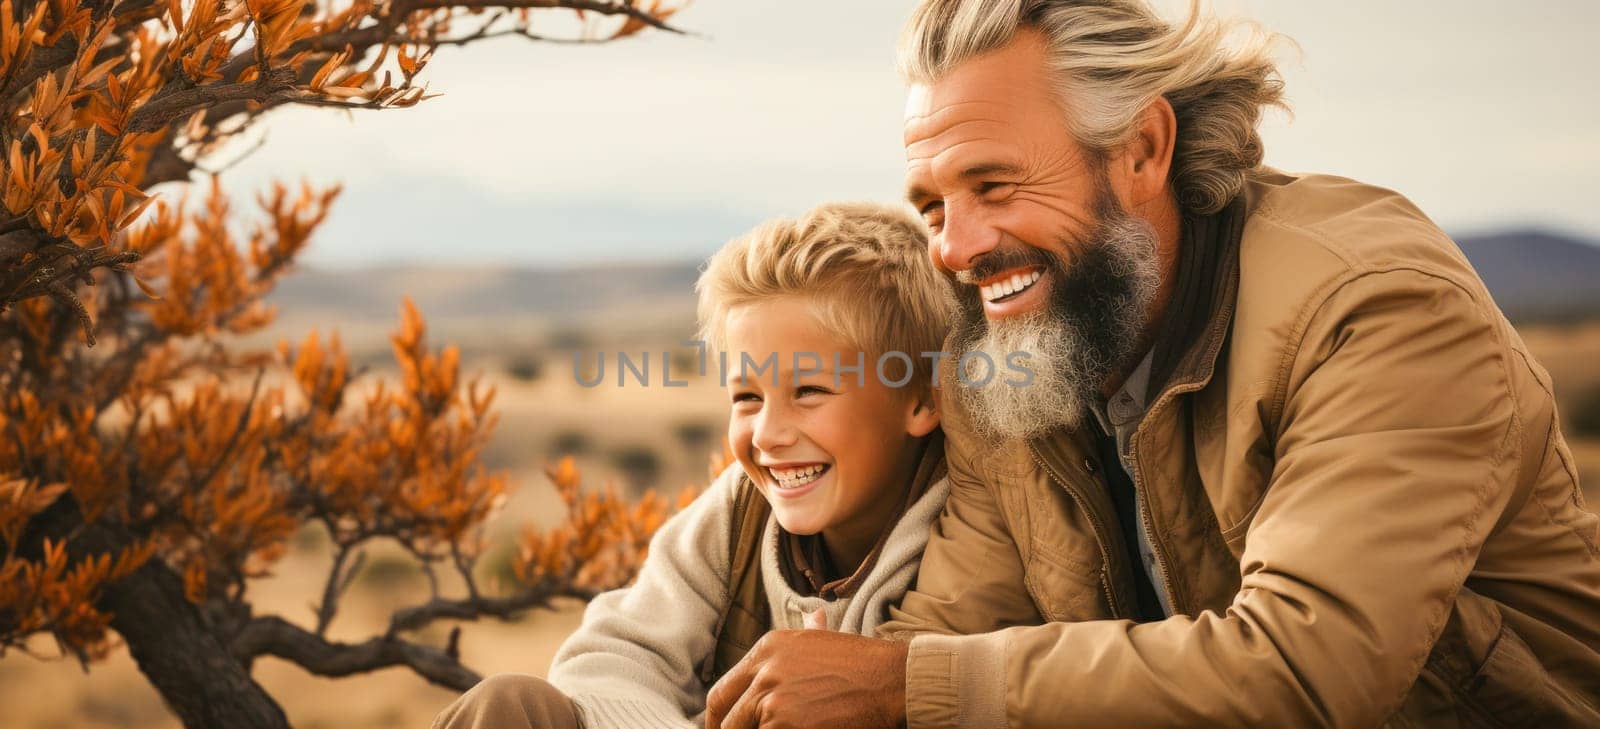 Happy moments of grandfather and grandson among the beauty of nature by Yurich32